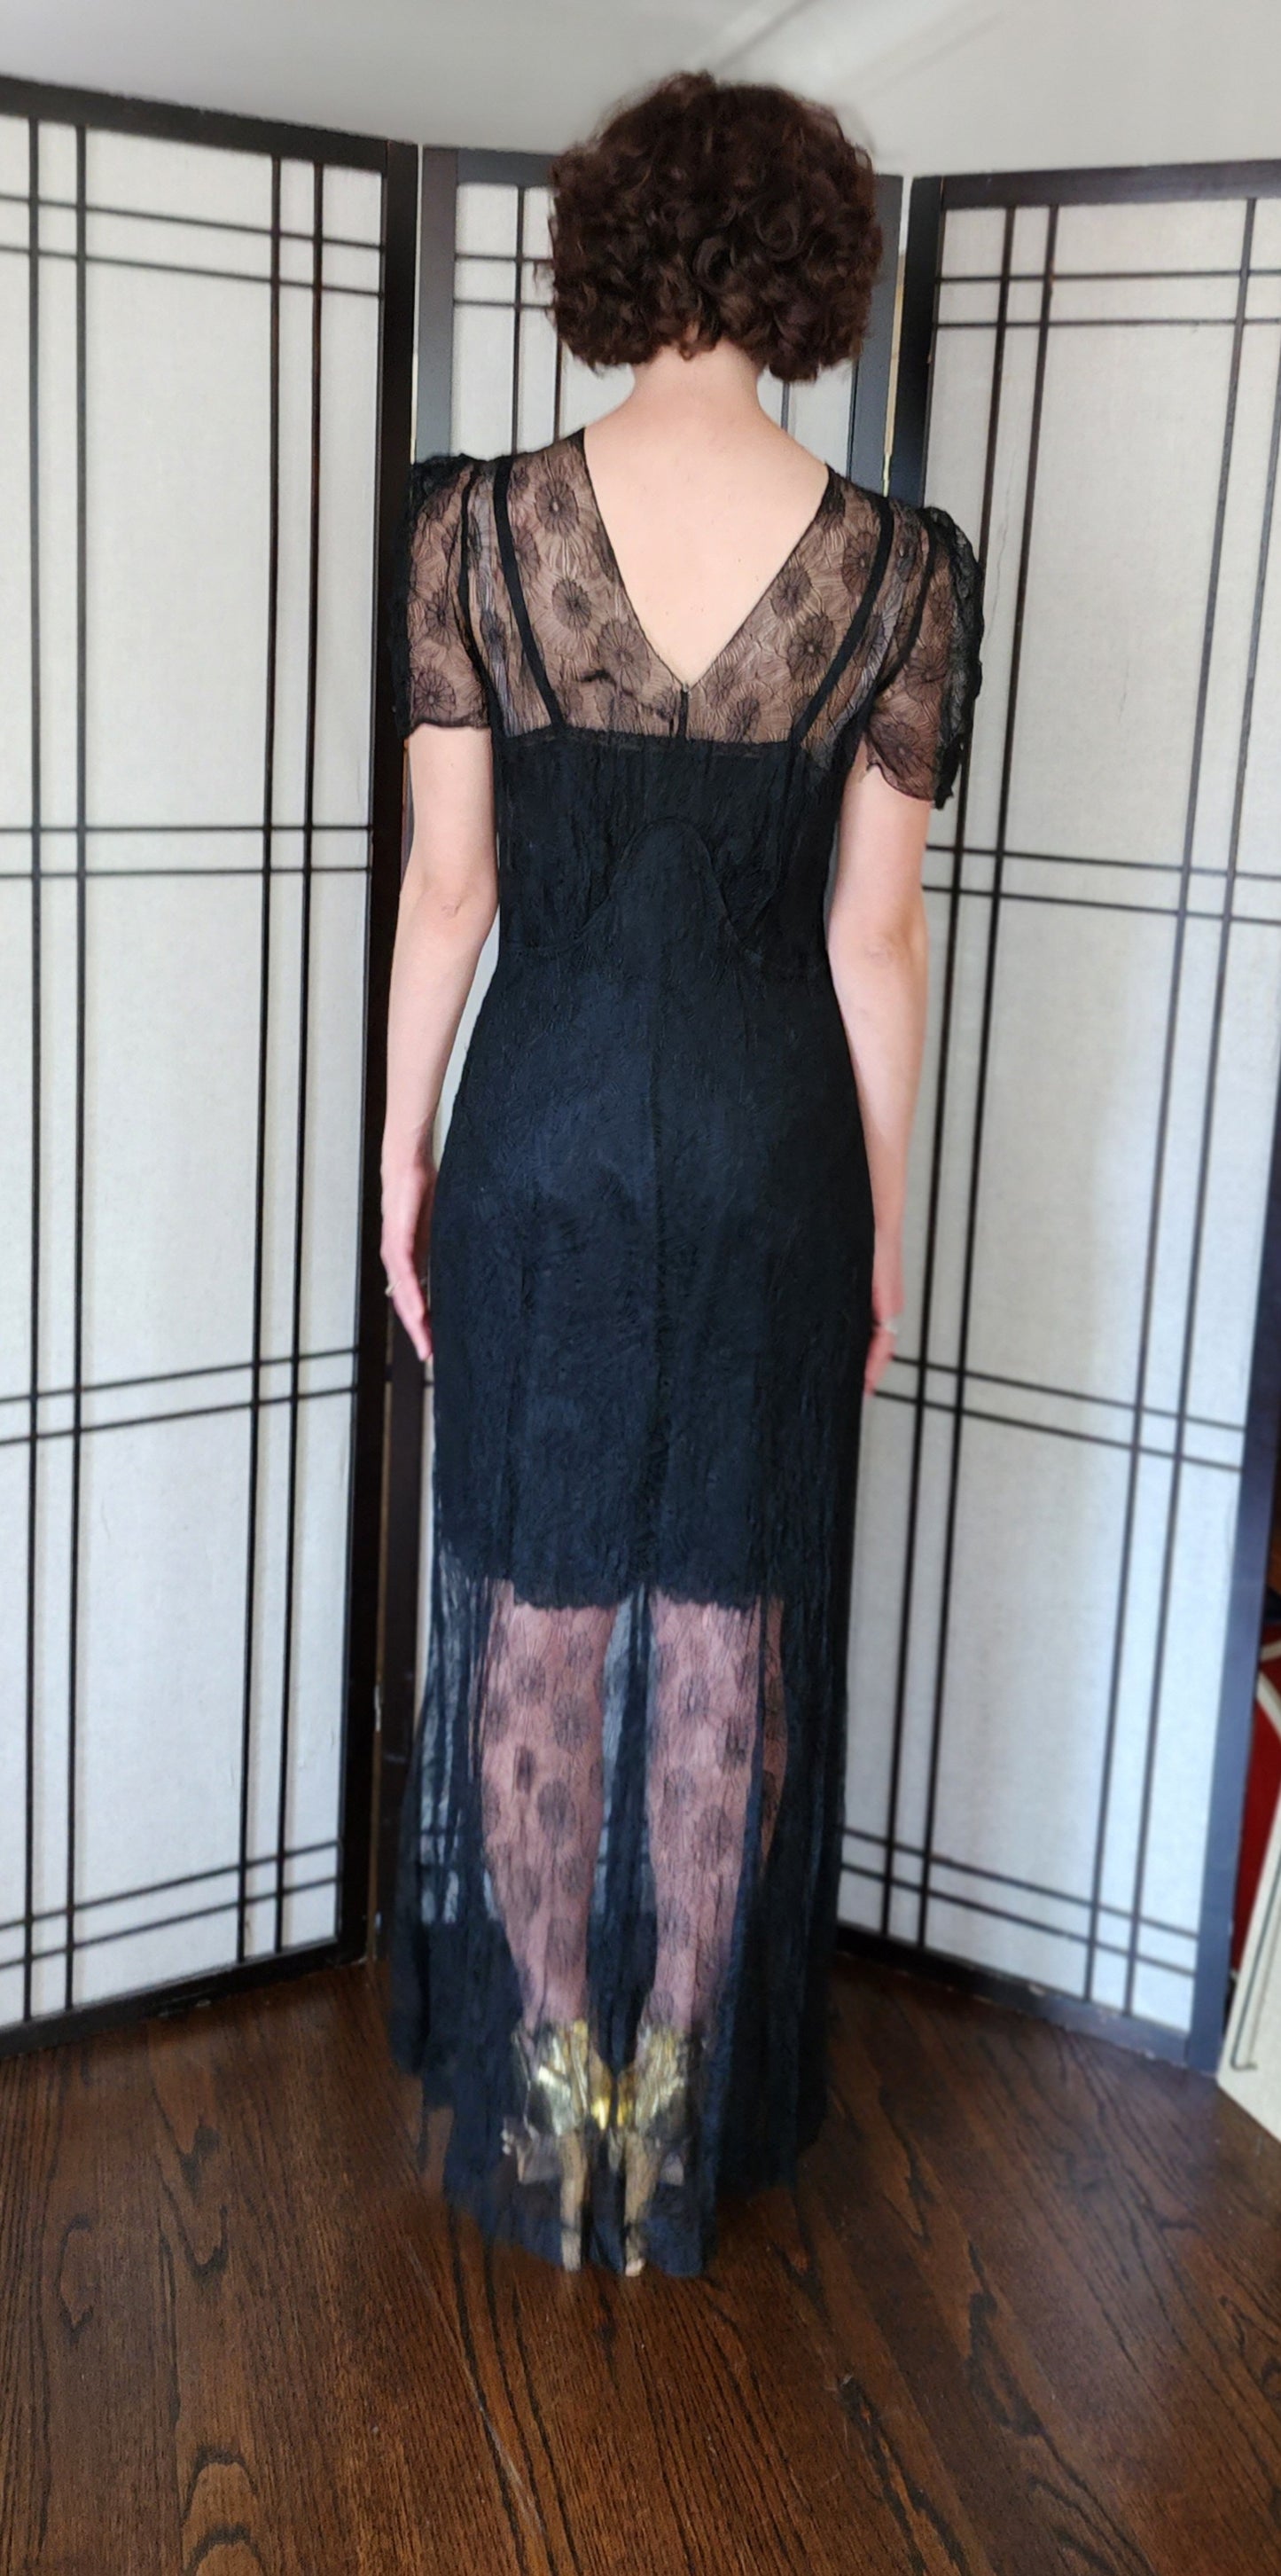 30s Sheer Black Lace Evening Dress Short Puffed Sleeves